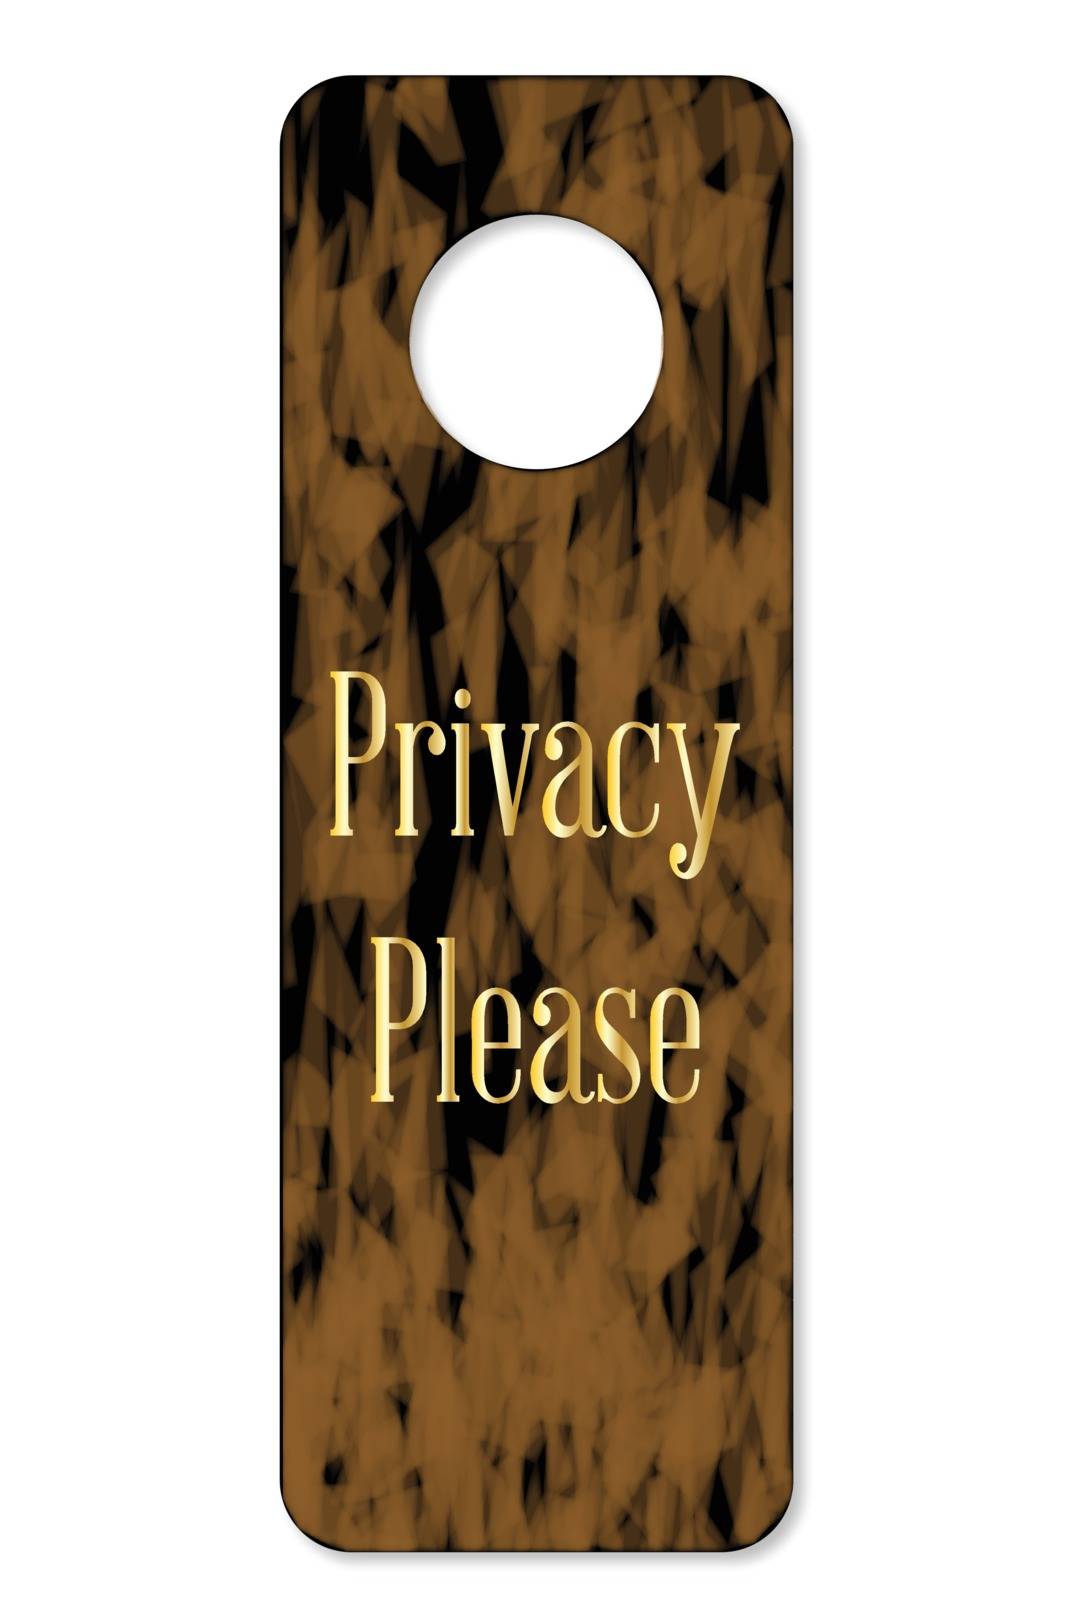 A door knob sign with the legend privacy please